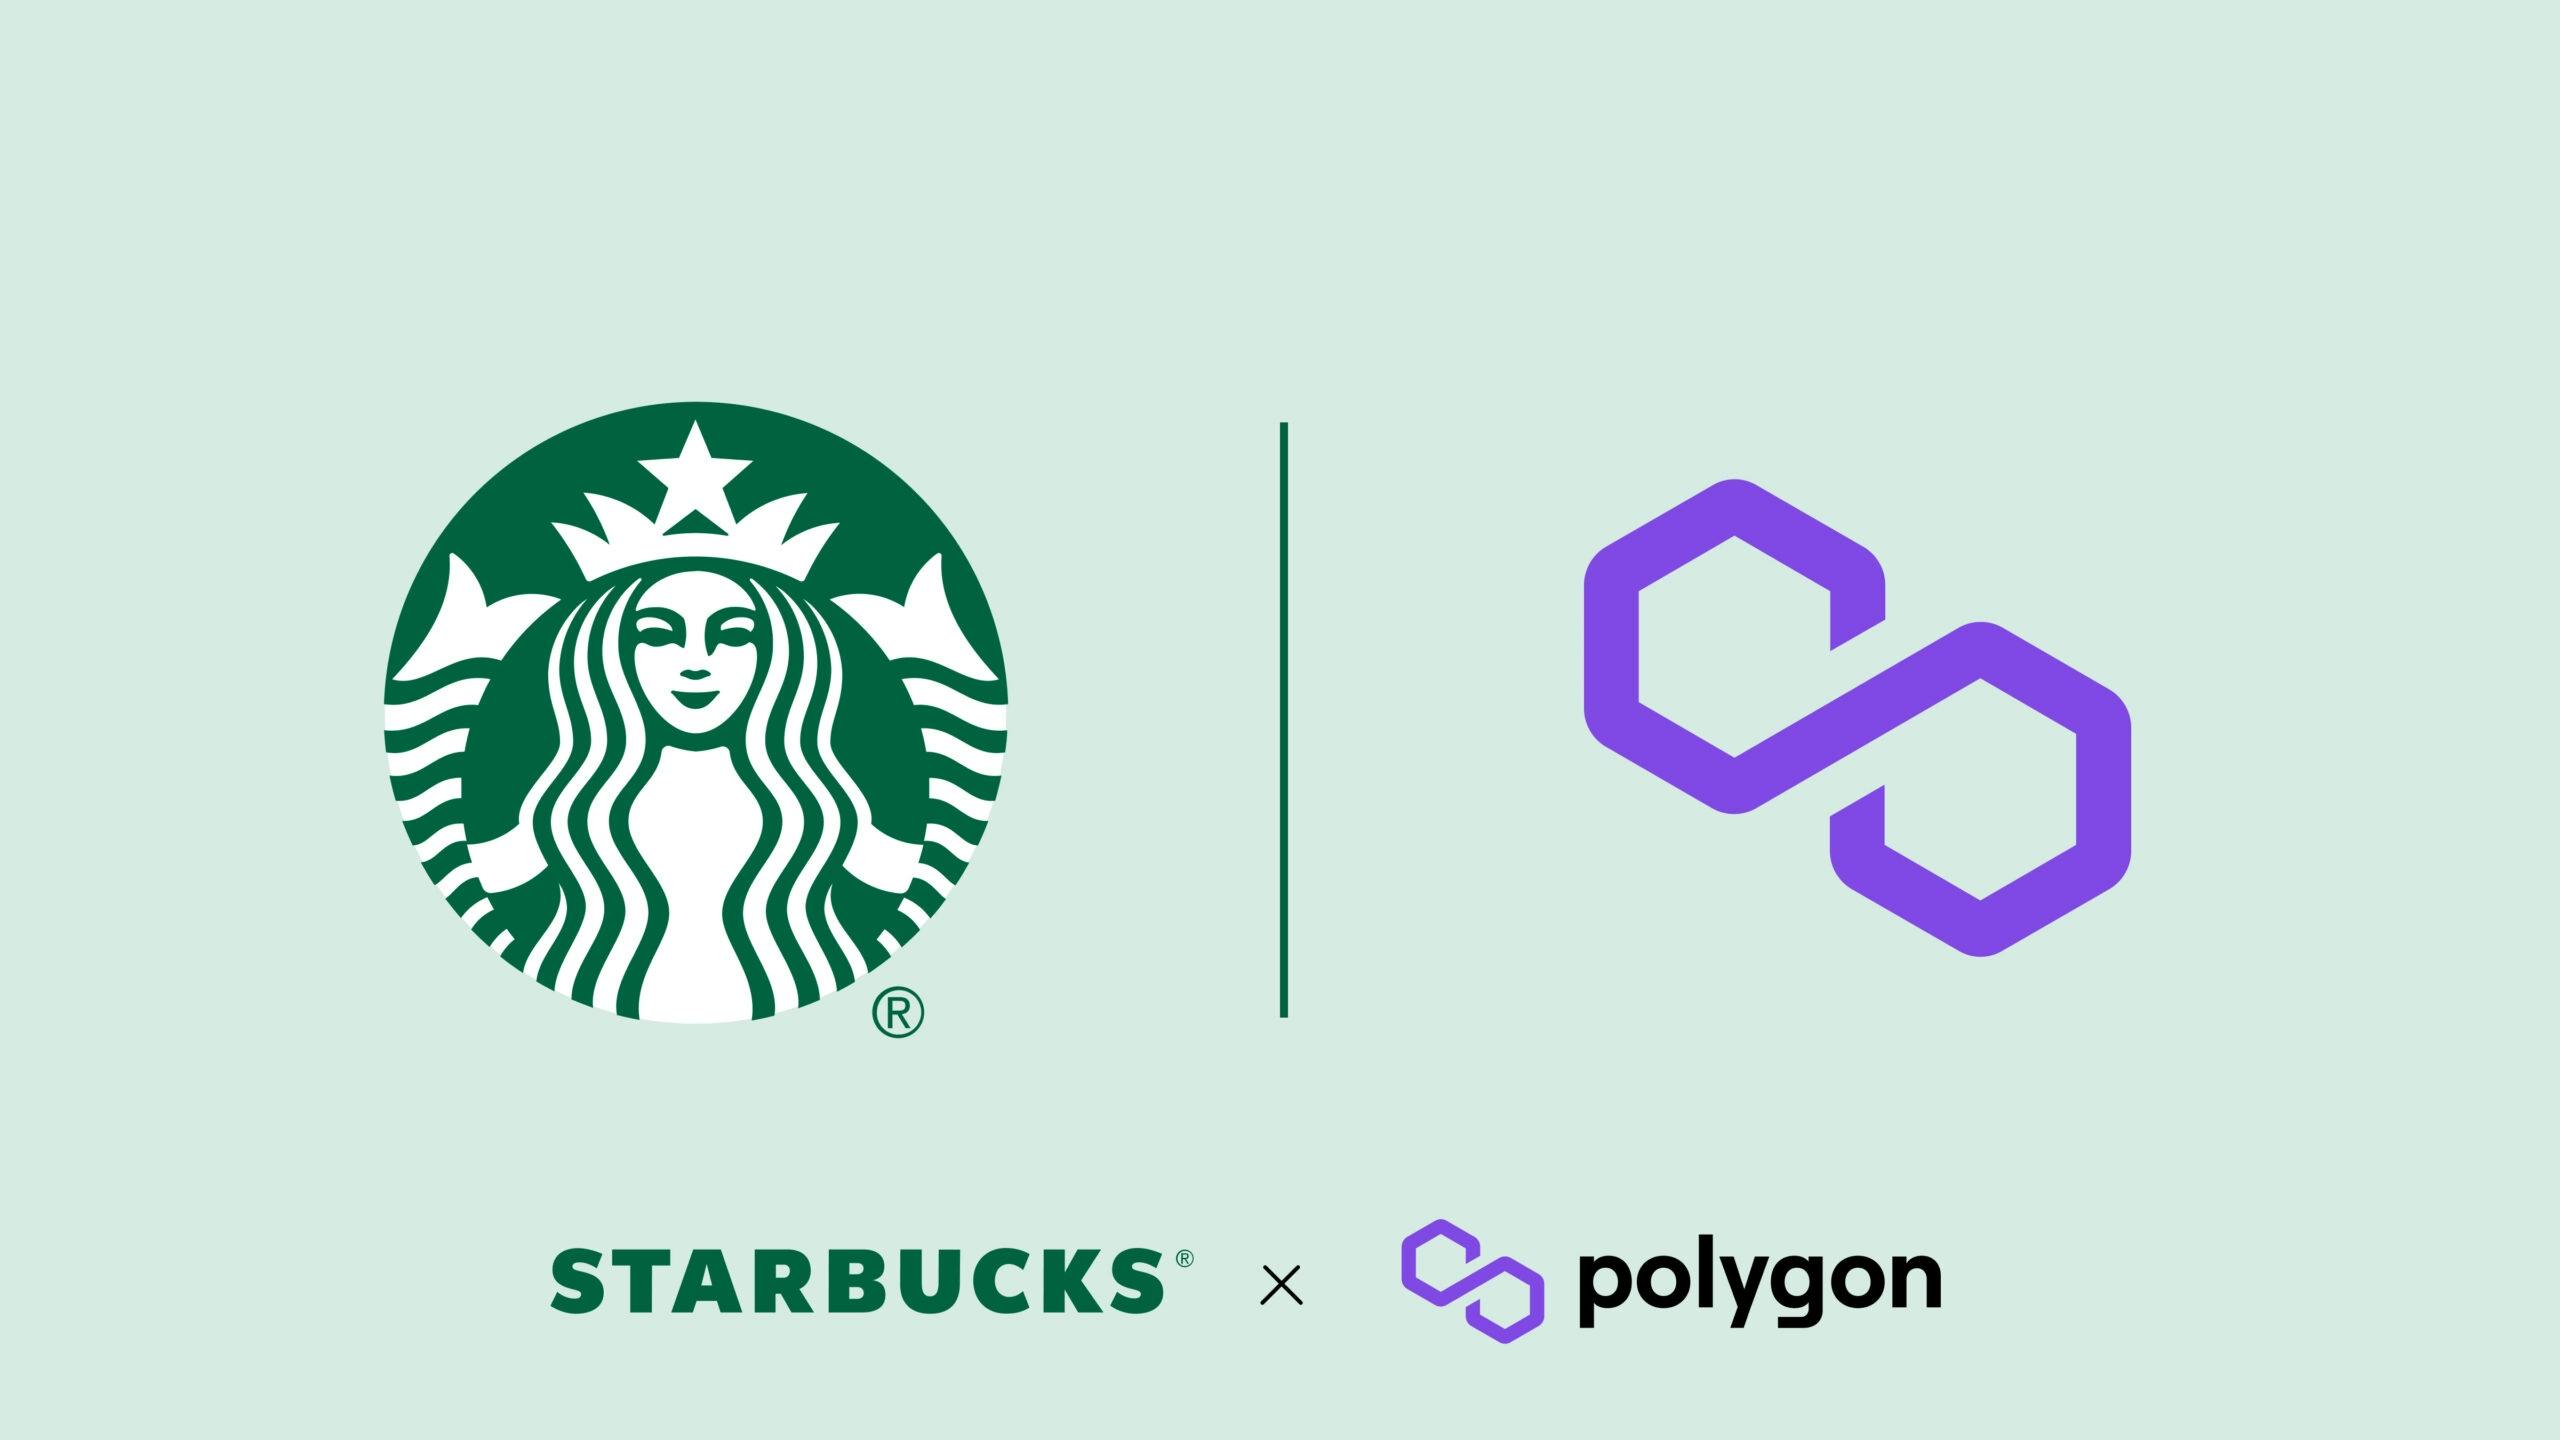 Starbucks tapped Polygon to launch its Odyssey "digital stamp" royalty rewards and branding experience for customers this year.